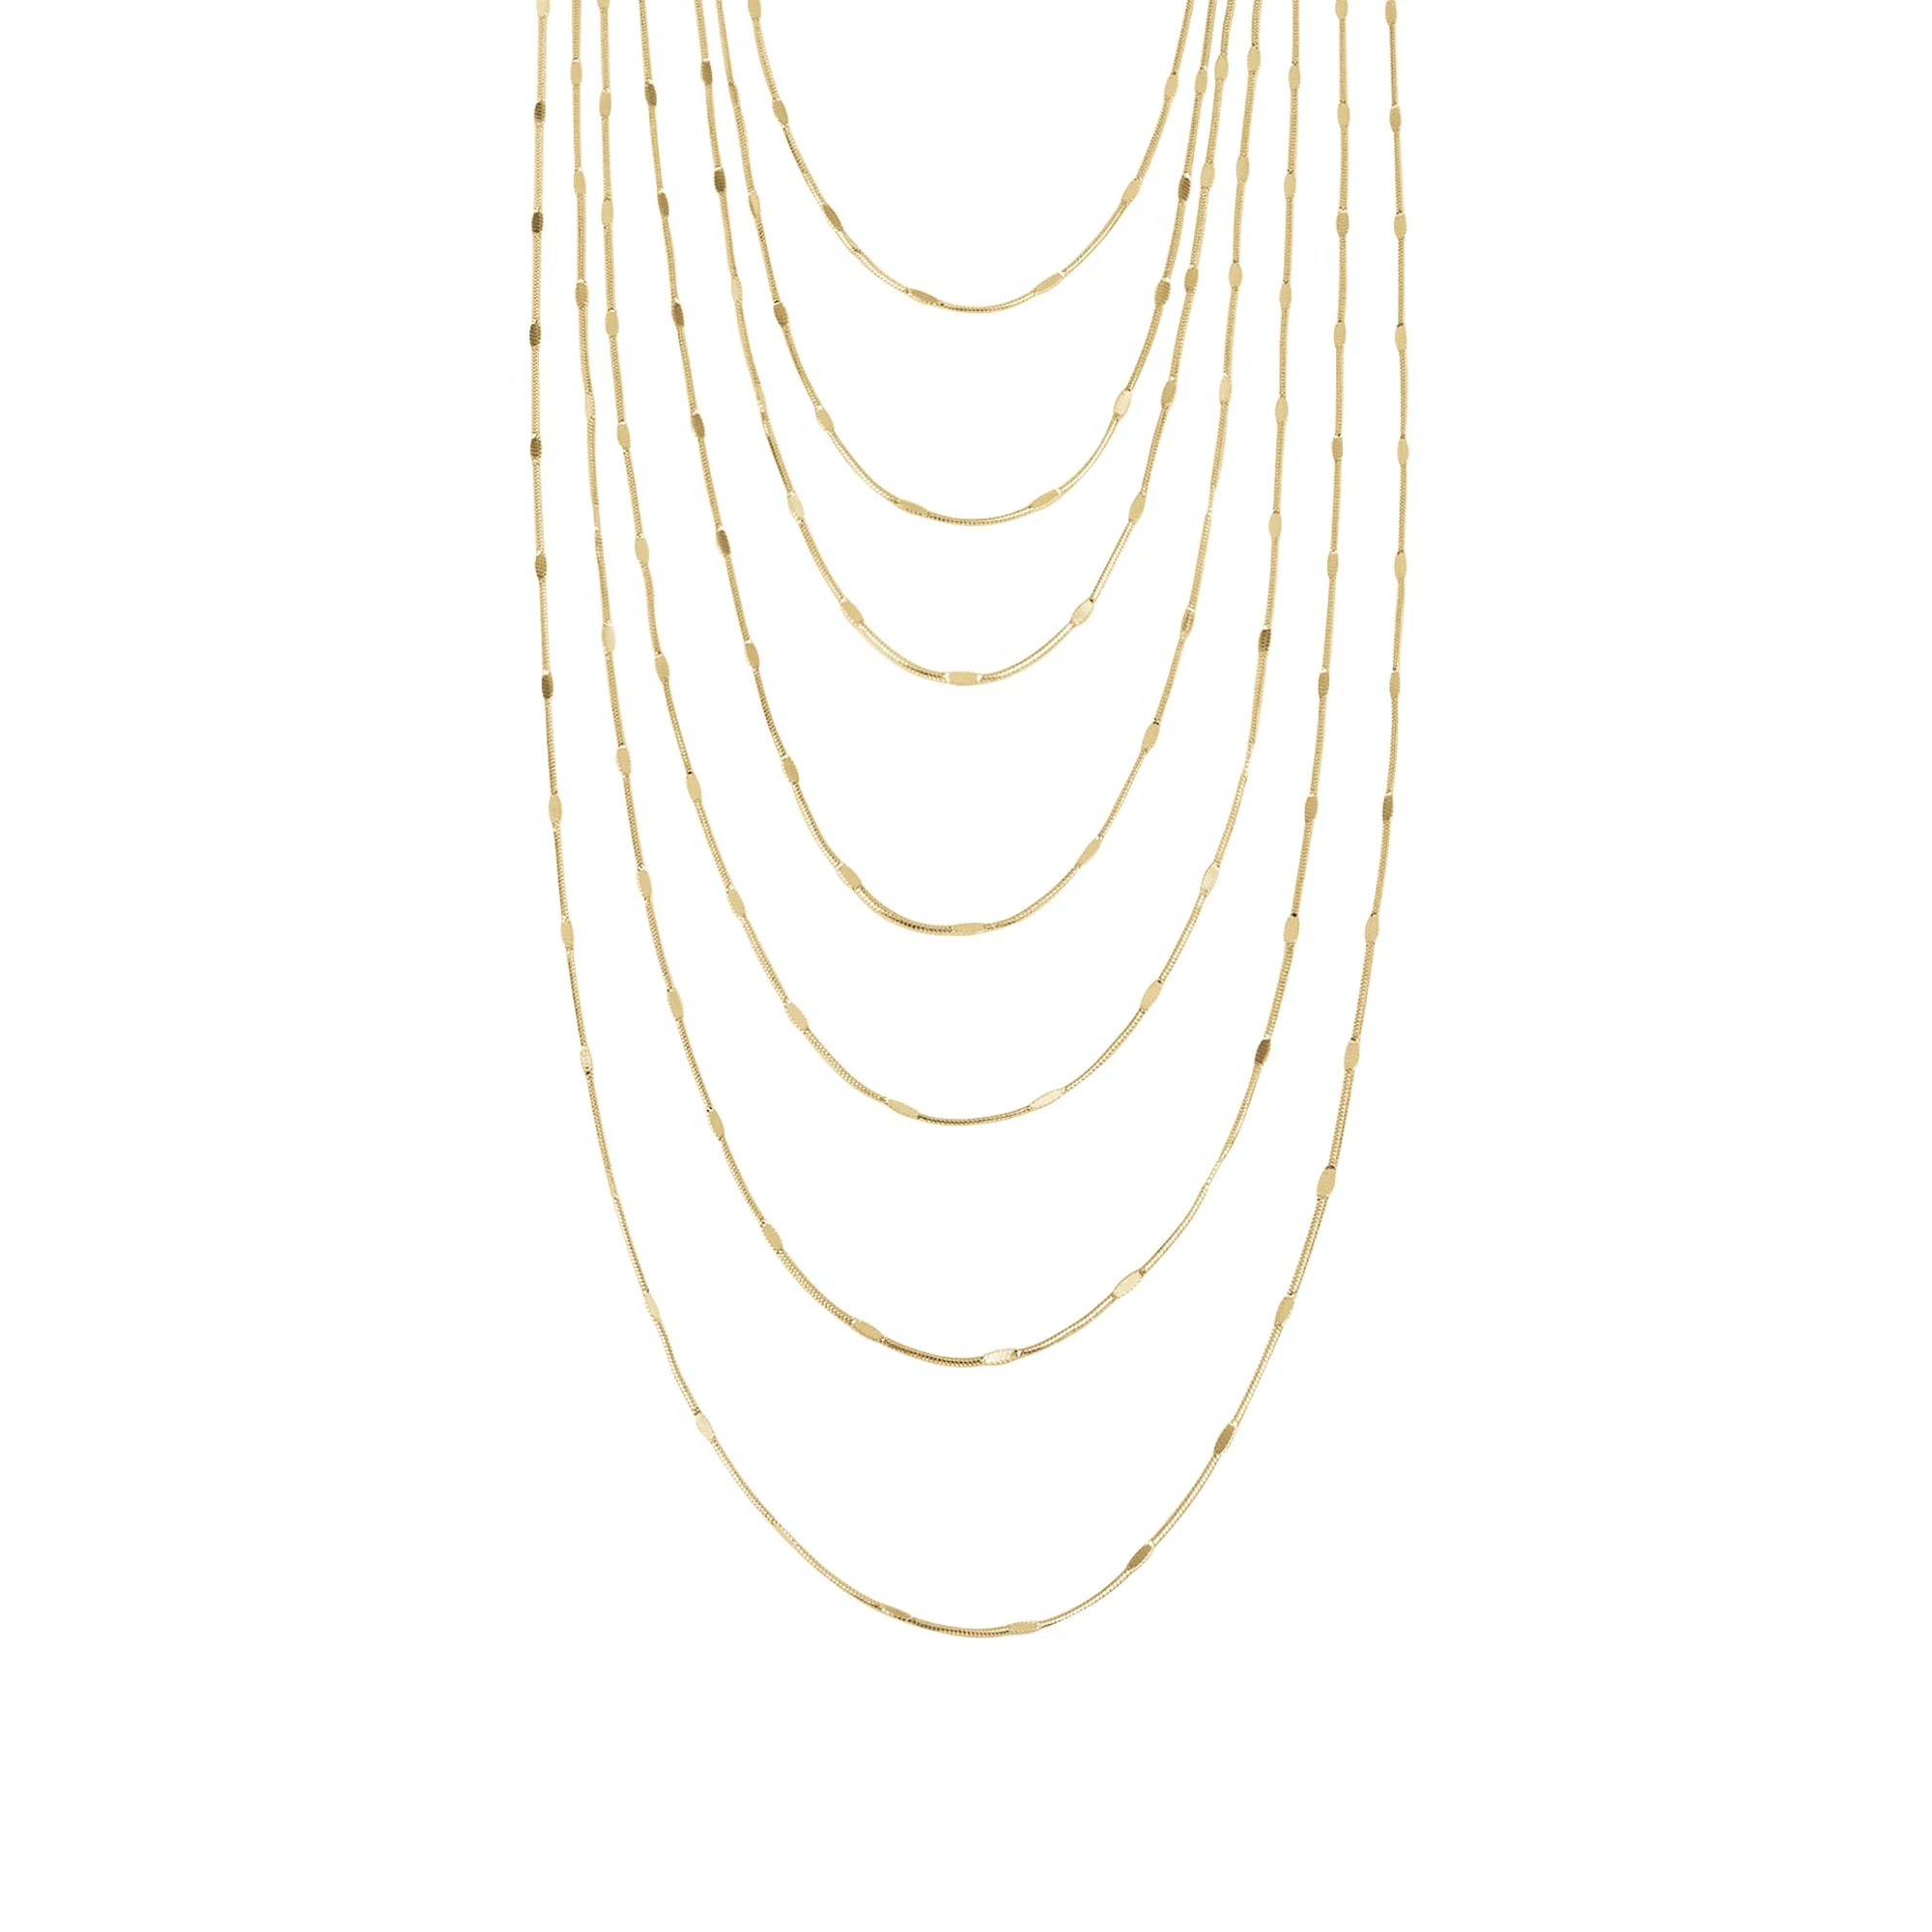 SINUOUS - IP GOLD POLISHED STAINLESS STEEL NECKLACE - 1 - TJ3016 | Breil